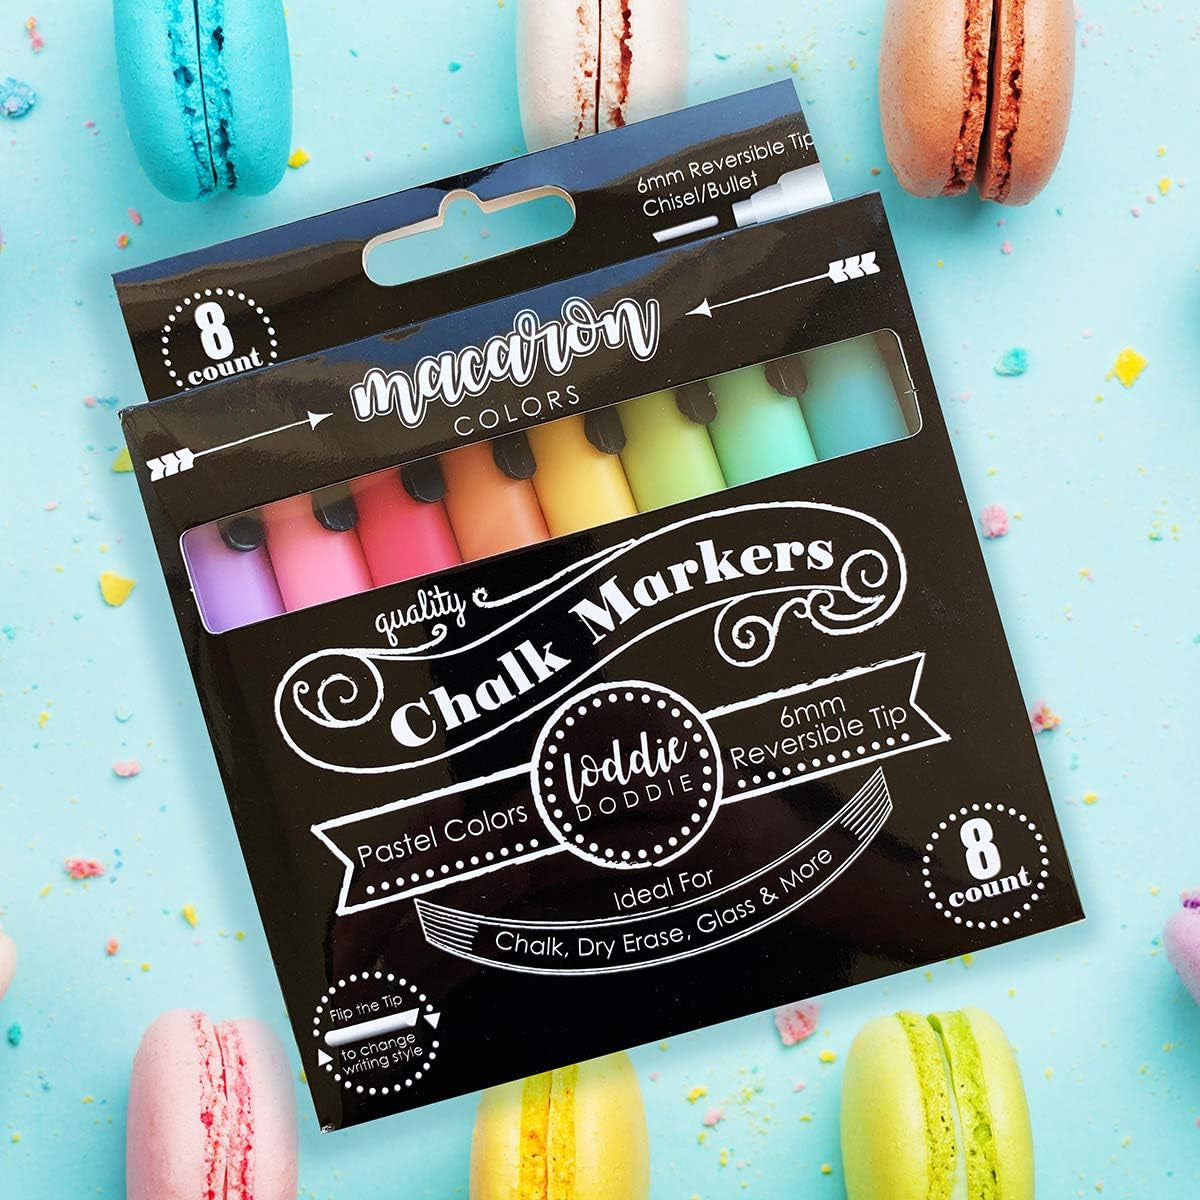 Liquid Chalk Markers for Chalkboard - 6Mm Reversible Chisel and Bullet Tips, Chalkboard Markers Erasable, Macaron Pastel Chalk Pens 8 Count